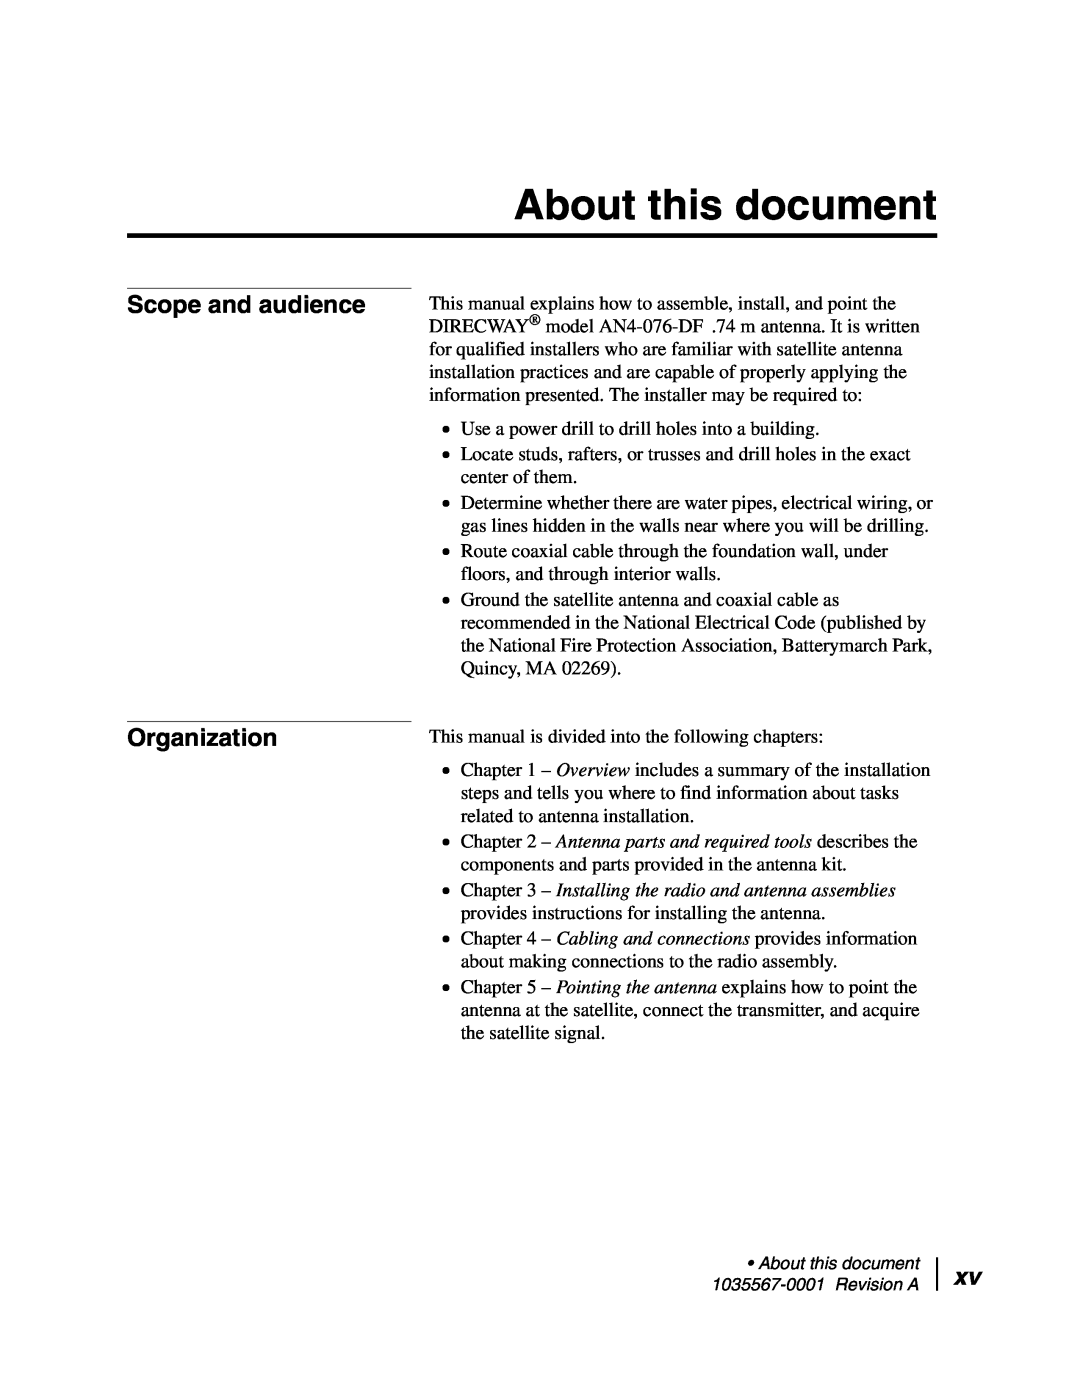 Hughes AN4-074-DF installation manual About this document, Scope and audience Organization 